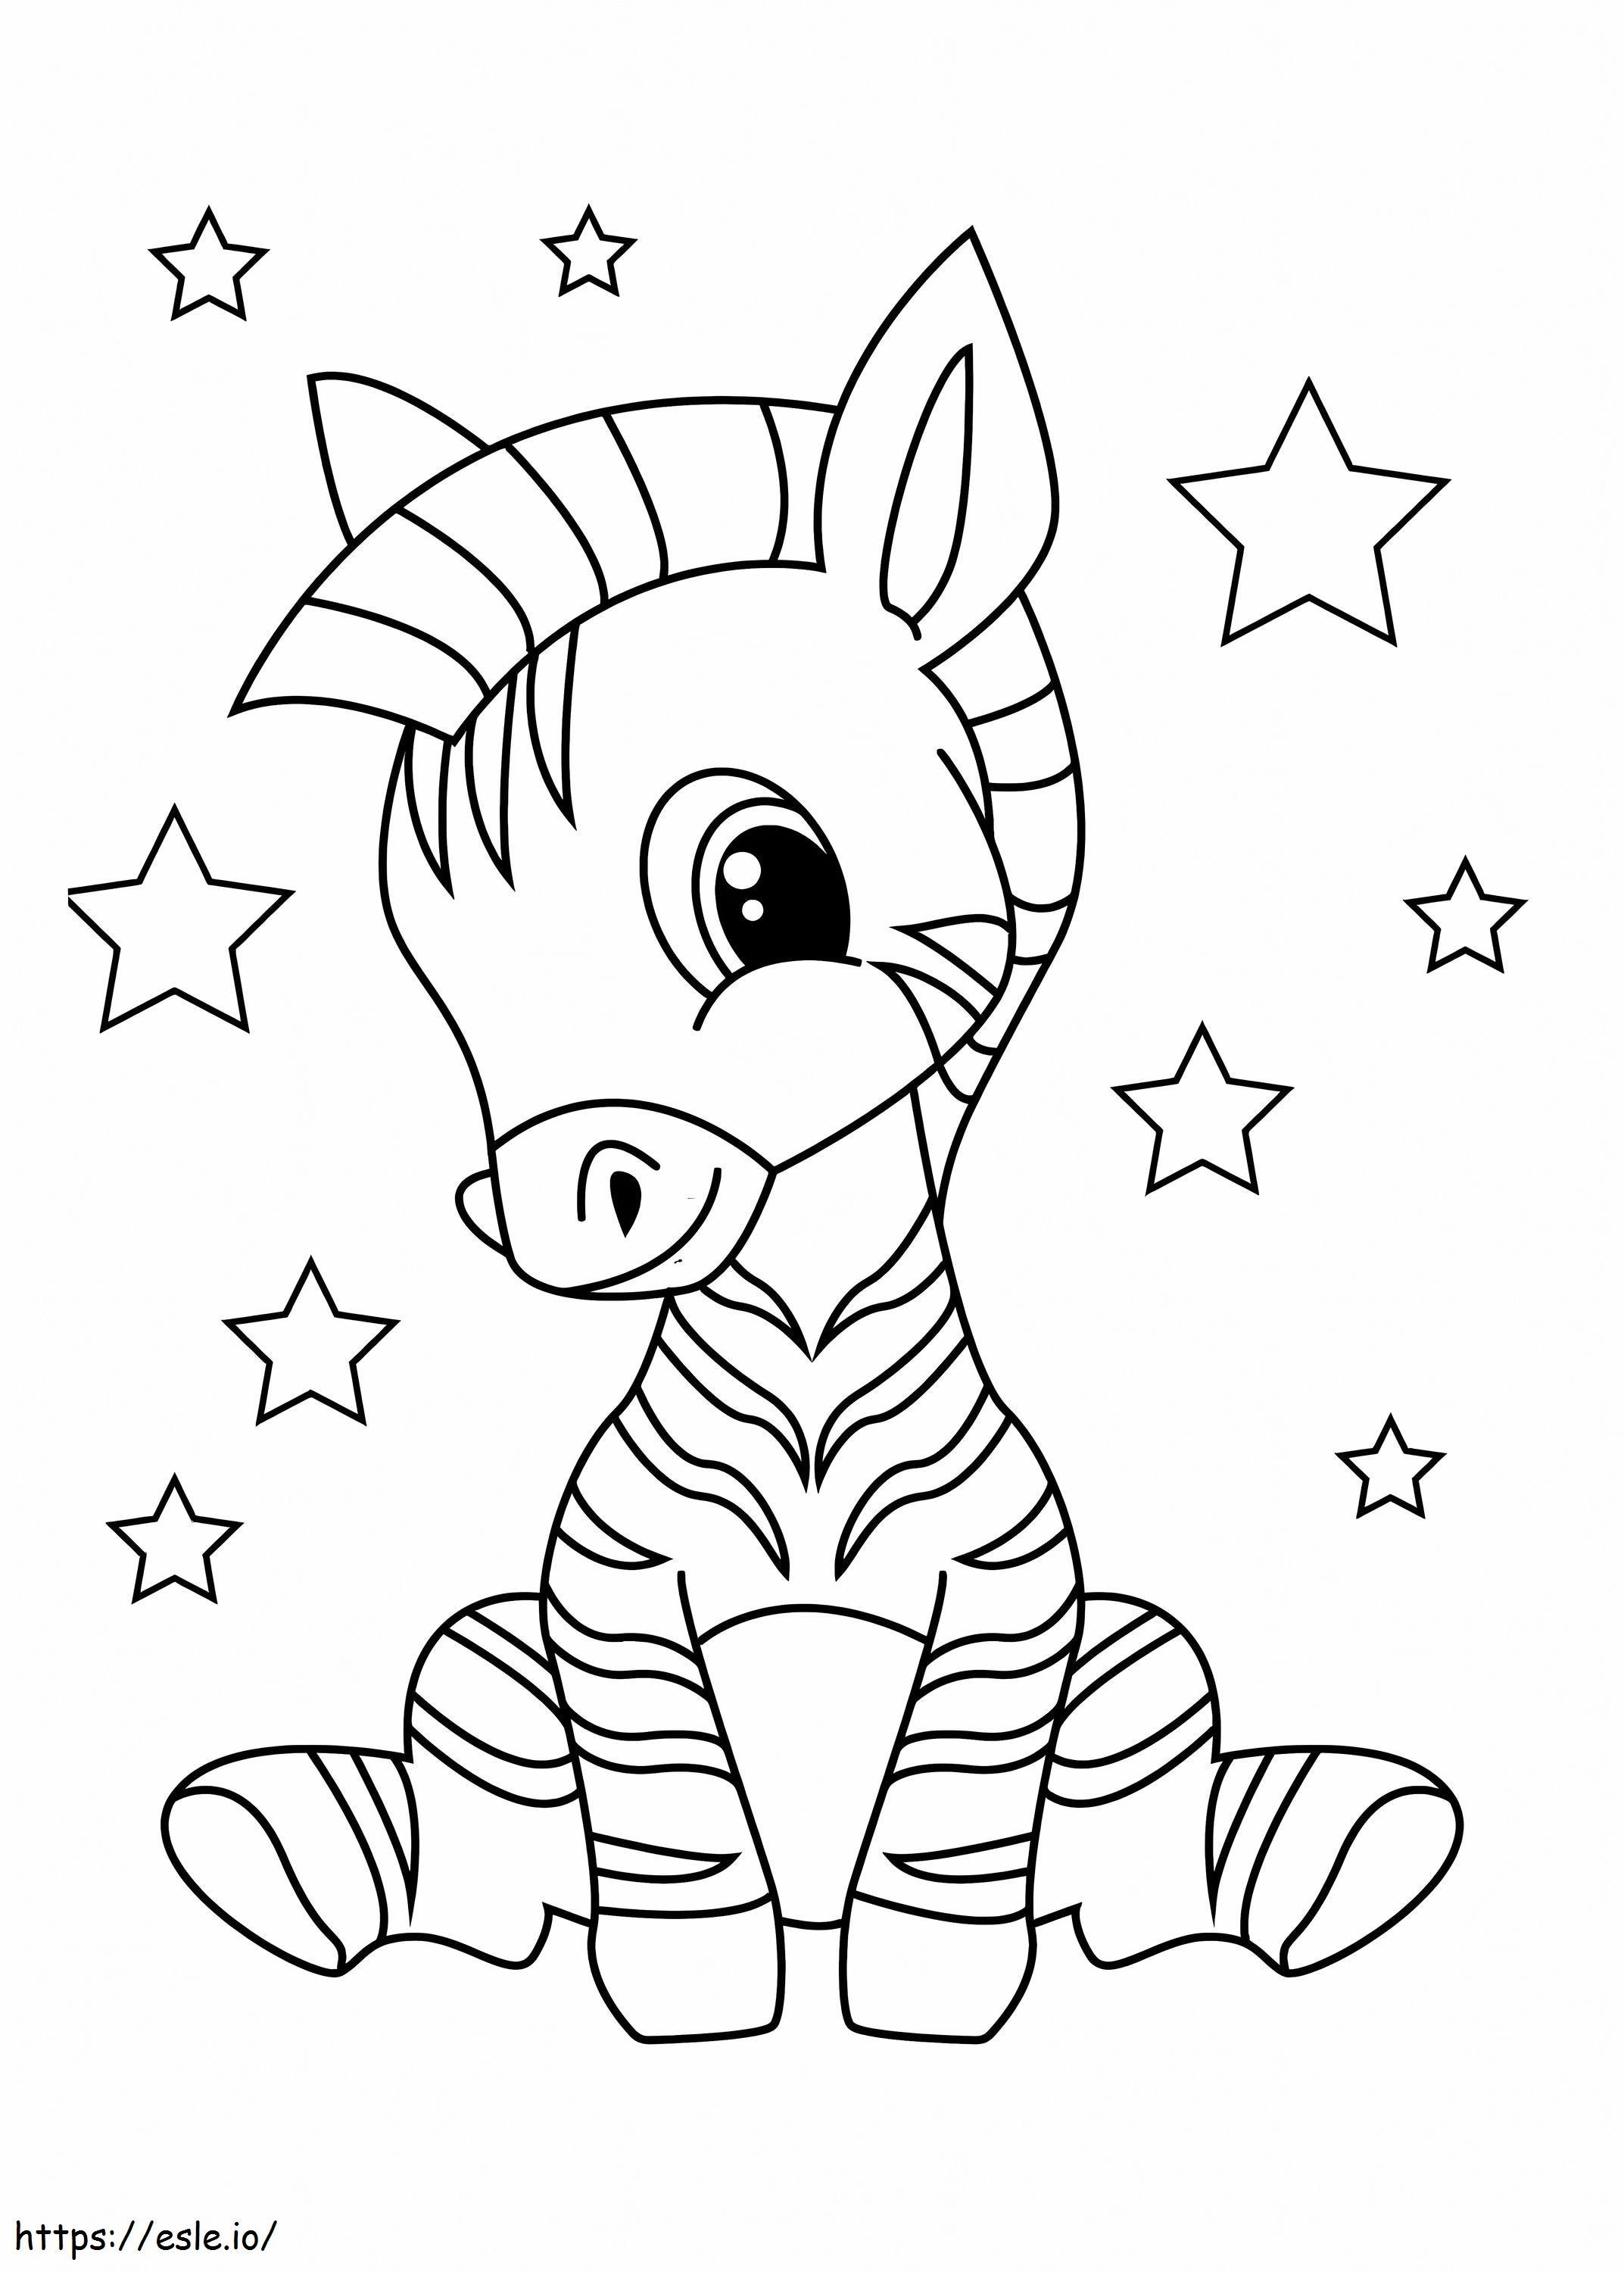 Zebra Sitting With Star coloring page